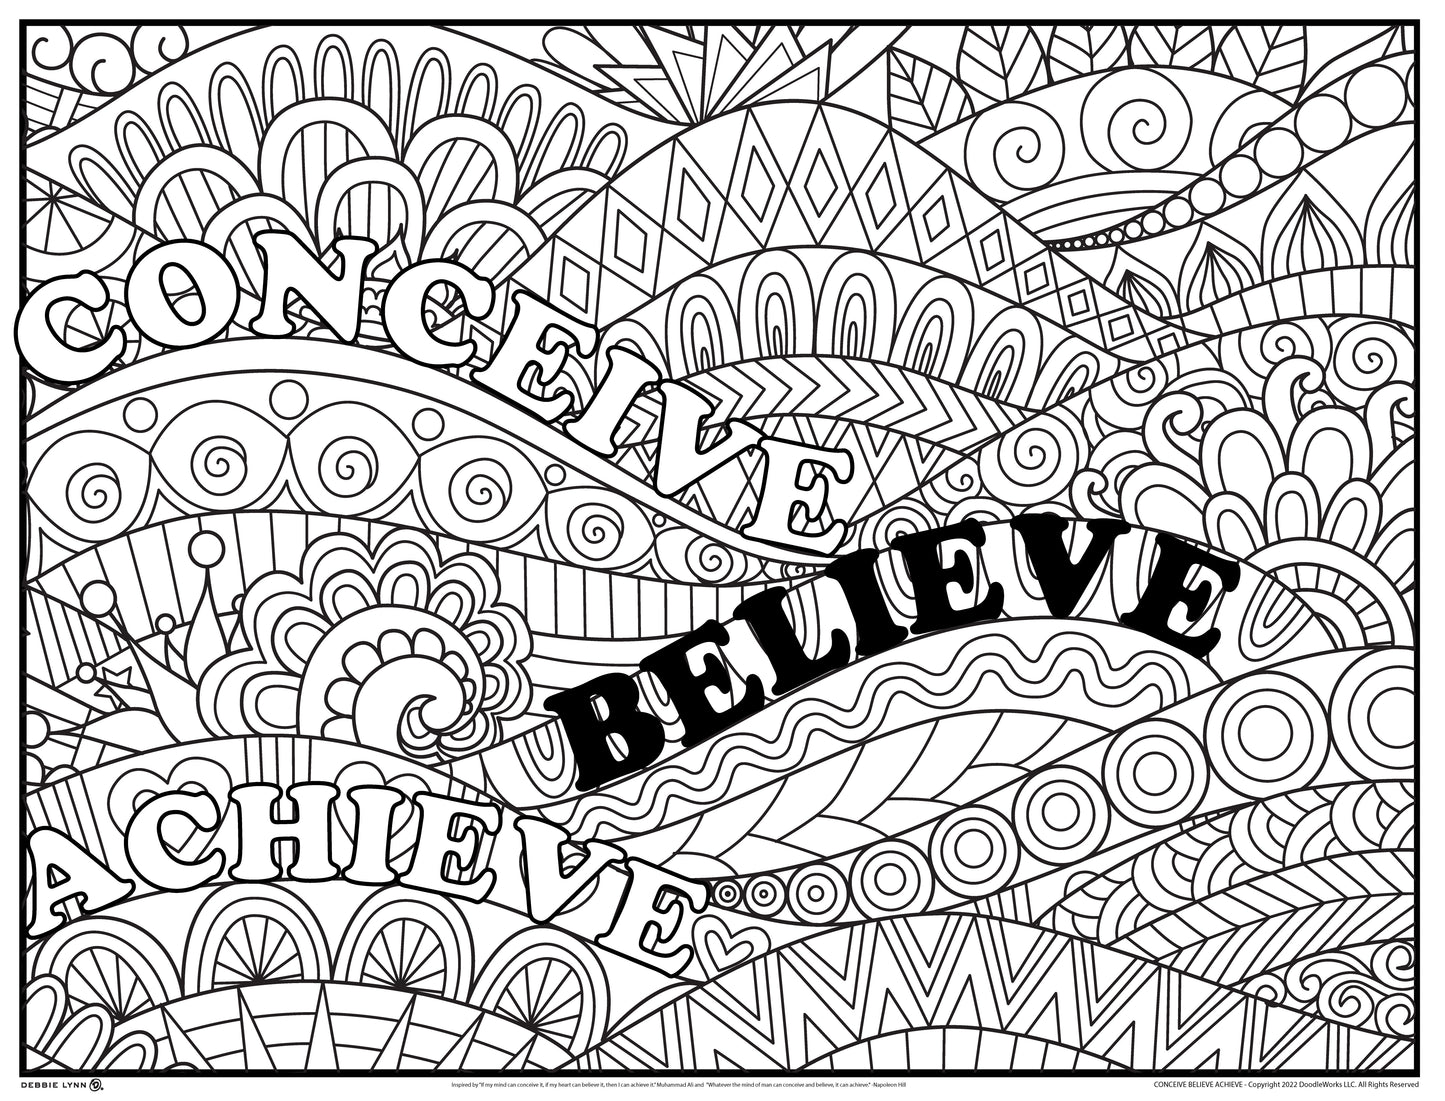 Conceive Believe Achieve Personalized Giant Coloring Poster 46"x60"